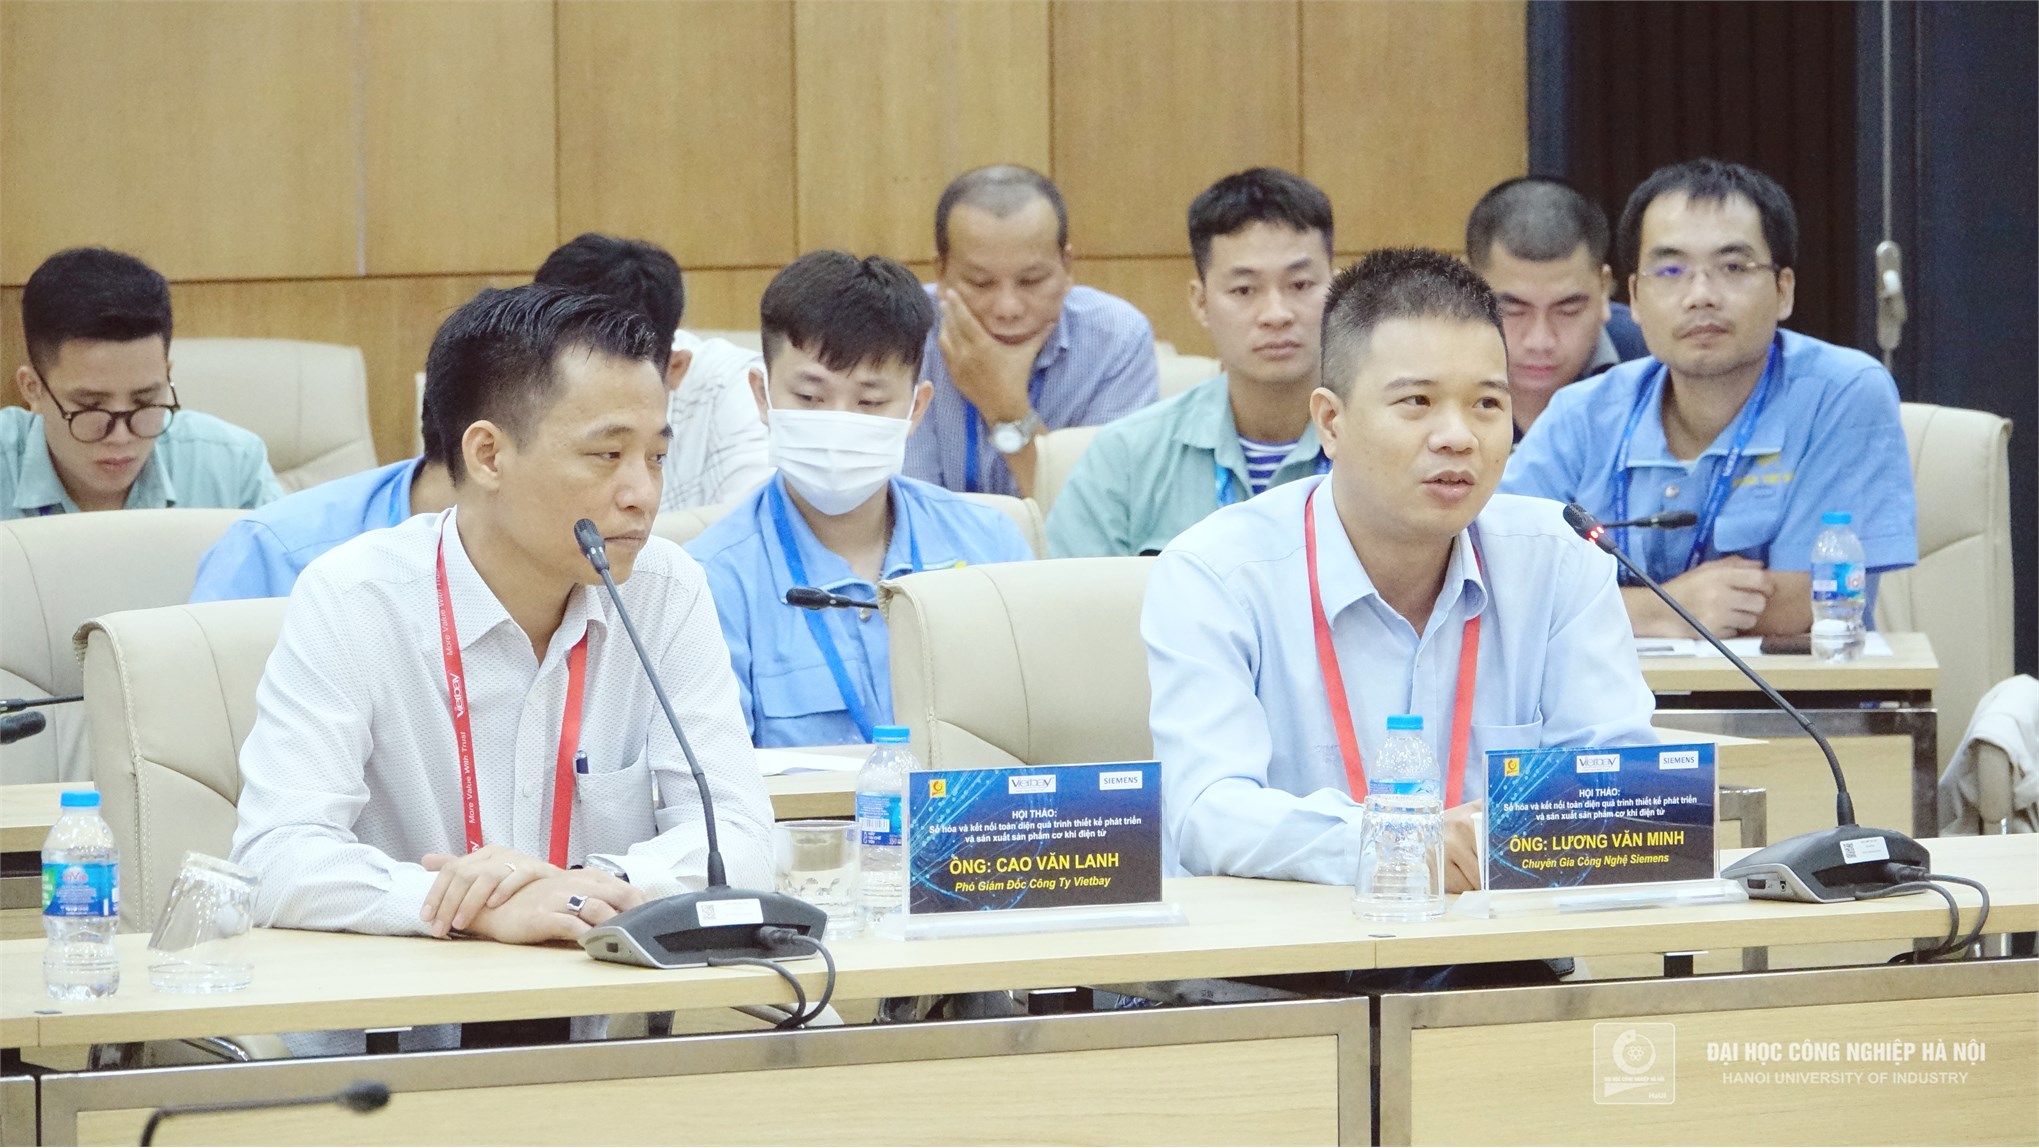 Workshop on `Digitalization and comprehensive connection of the design and manufacturing process of mechanical and electronic products`.